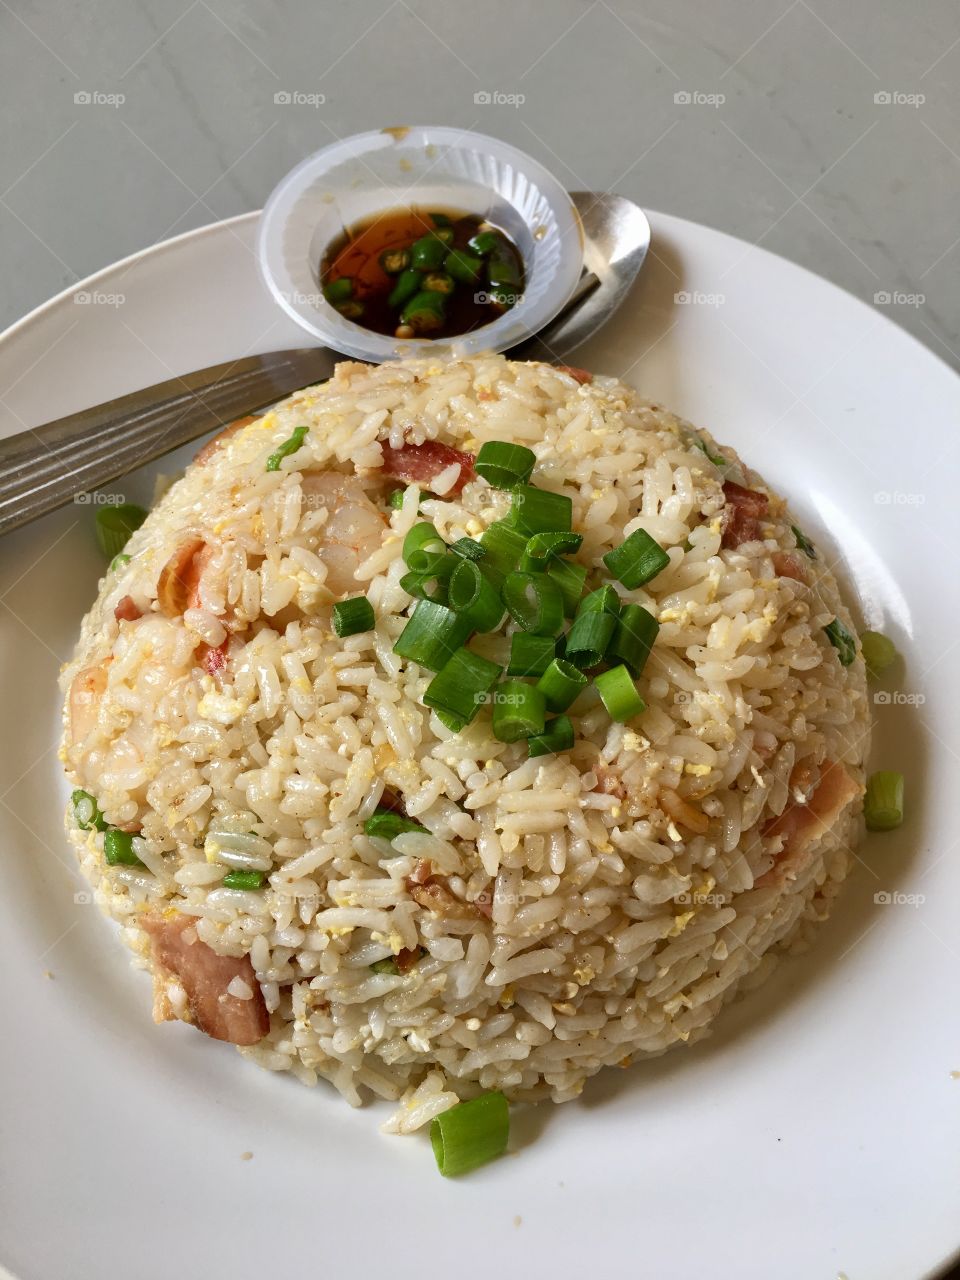 Bacon fried rice 